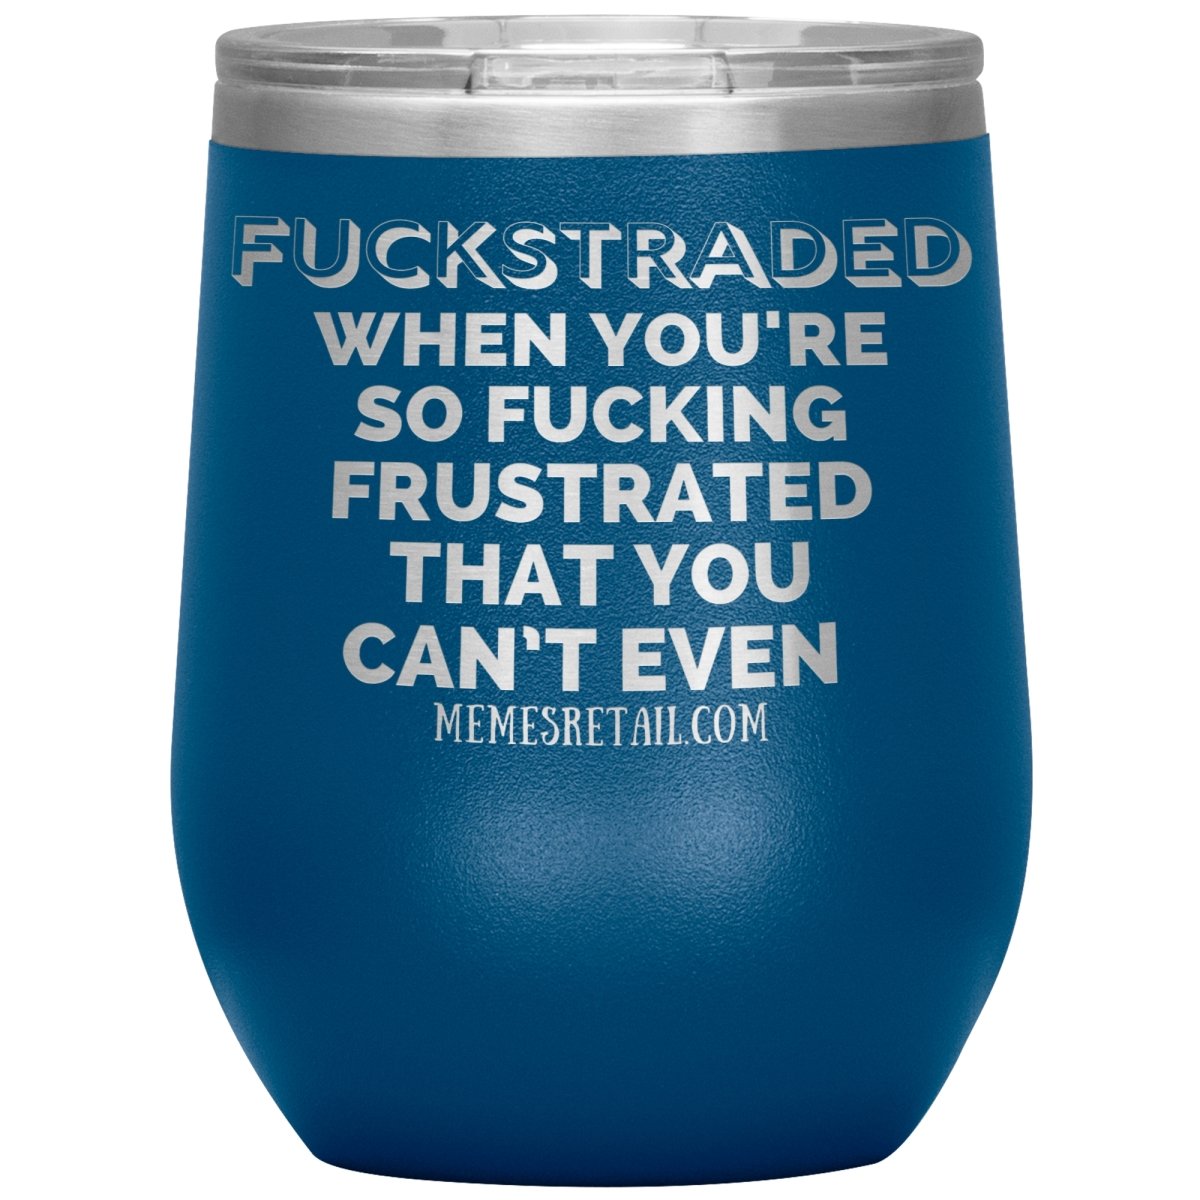 Fuckstraded, When You're So Fucking Frustrated That You Can’t Even Tumblers, 12oz Wine Insulated Tumbler / Blue - MemesRetail.com